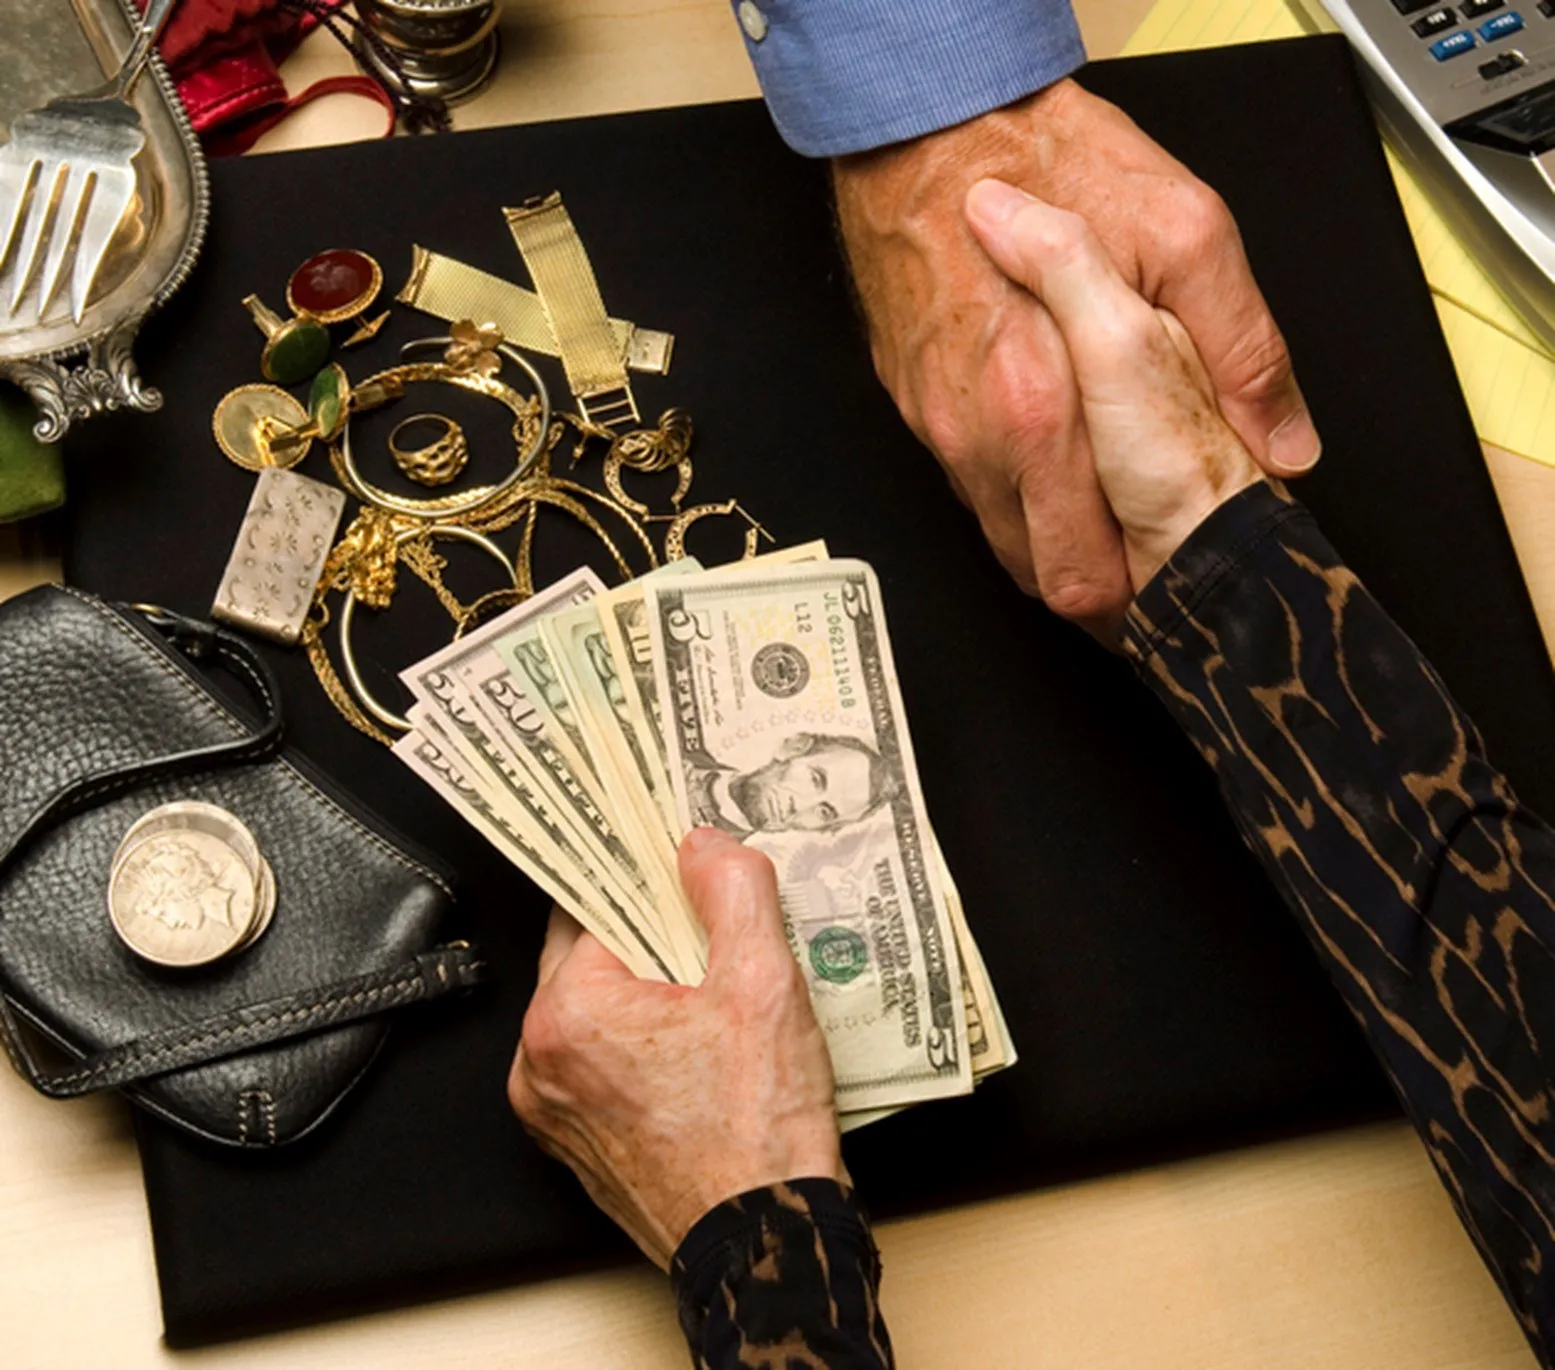 A women holding cash in her left hand is shaking a man's hand with her right hand. There is gold jewelry on the counter. It looks like a sale.